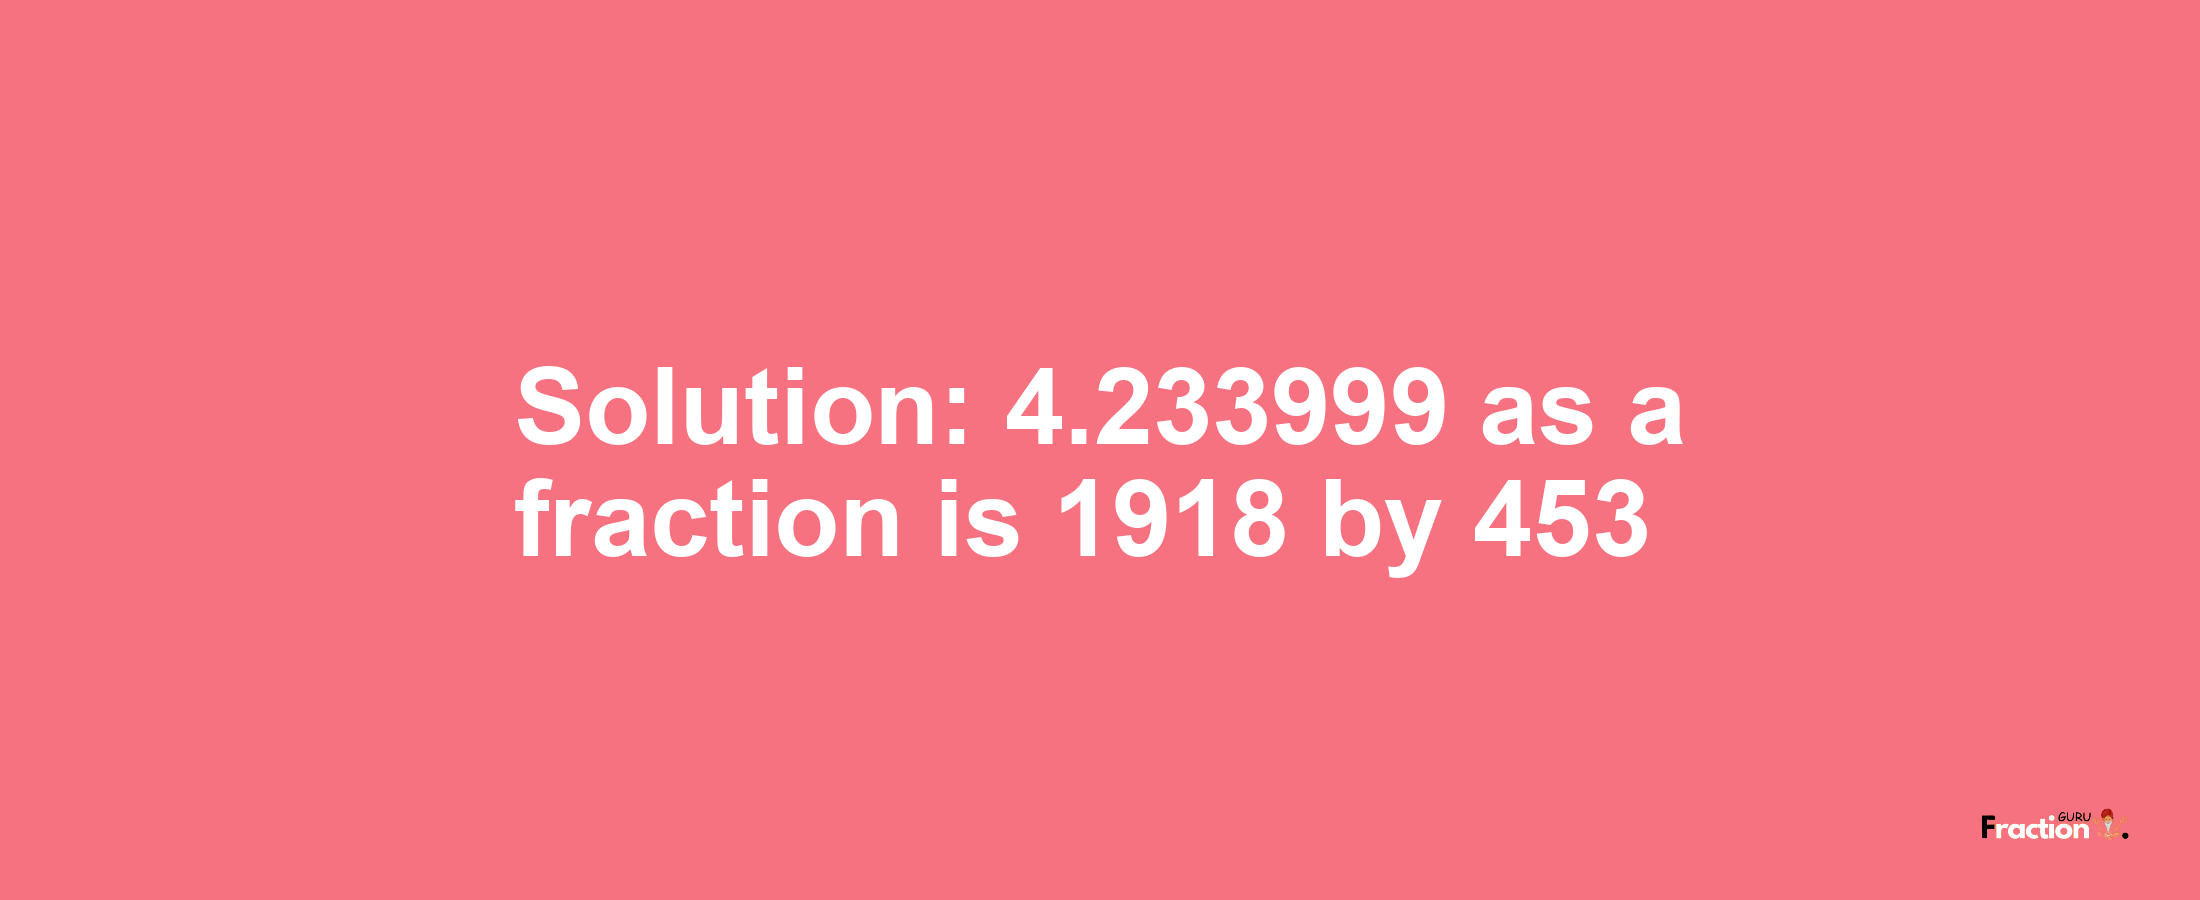 Solution:4.233999 as a fraction is 1918/453